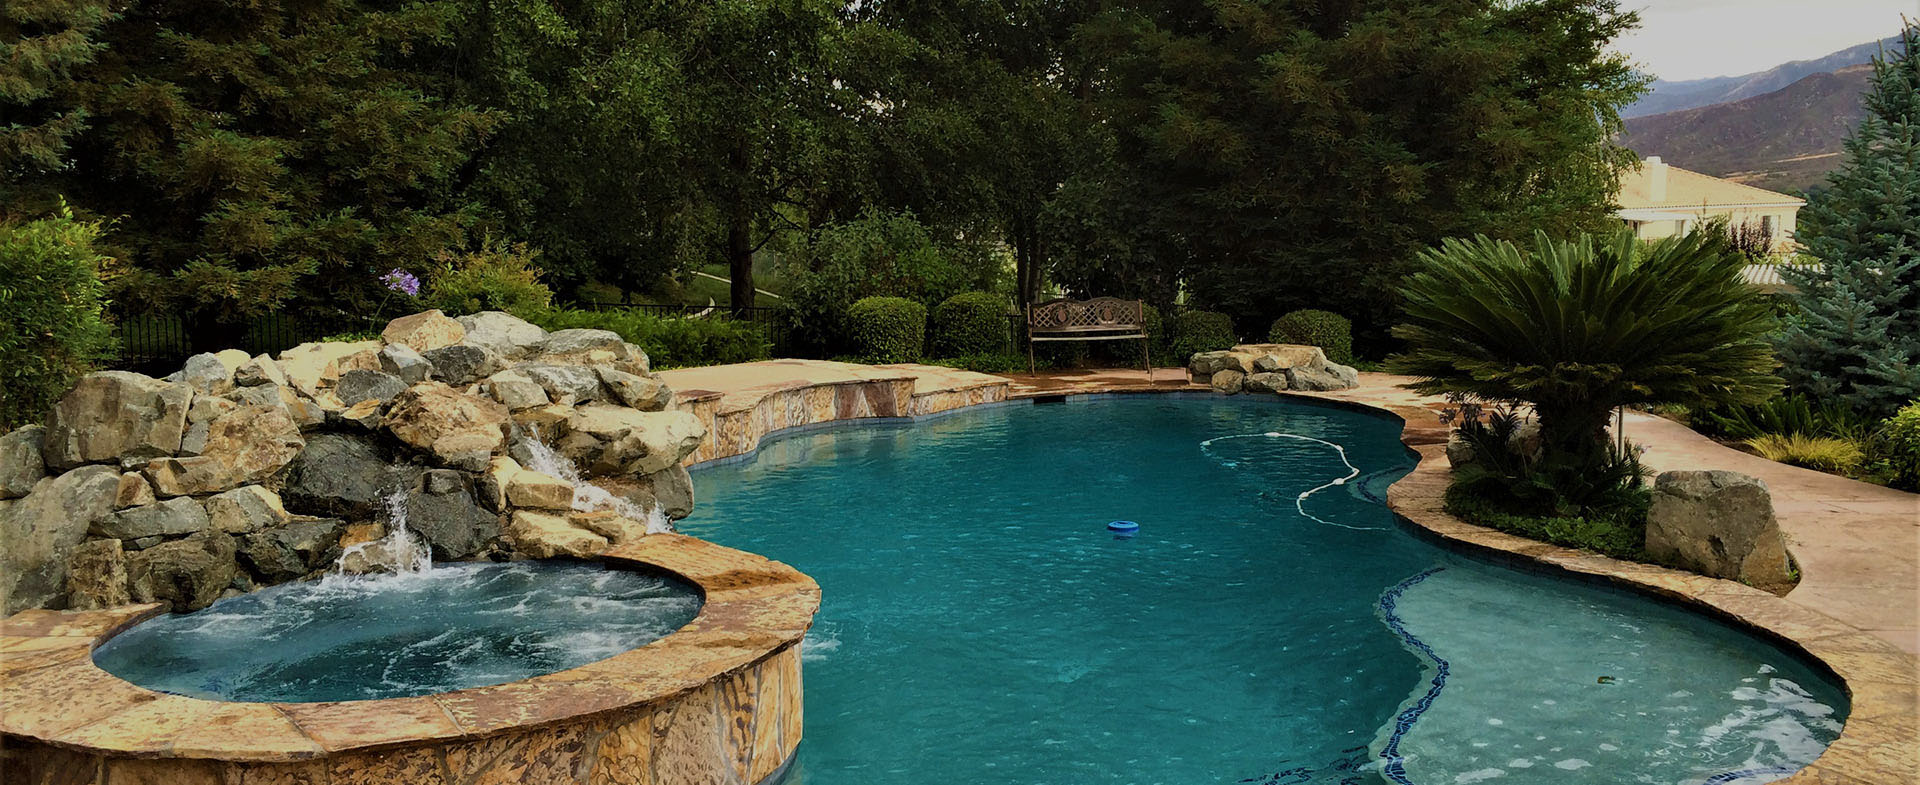 Pool Maintenance Service in Redlands and Yucaipa